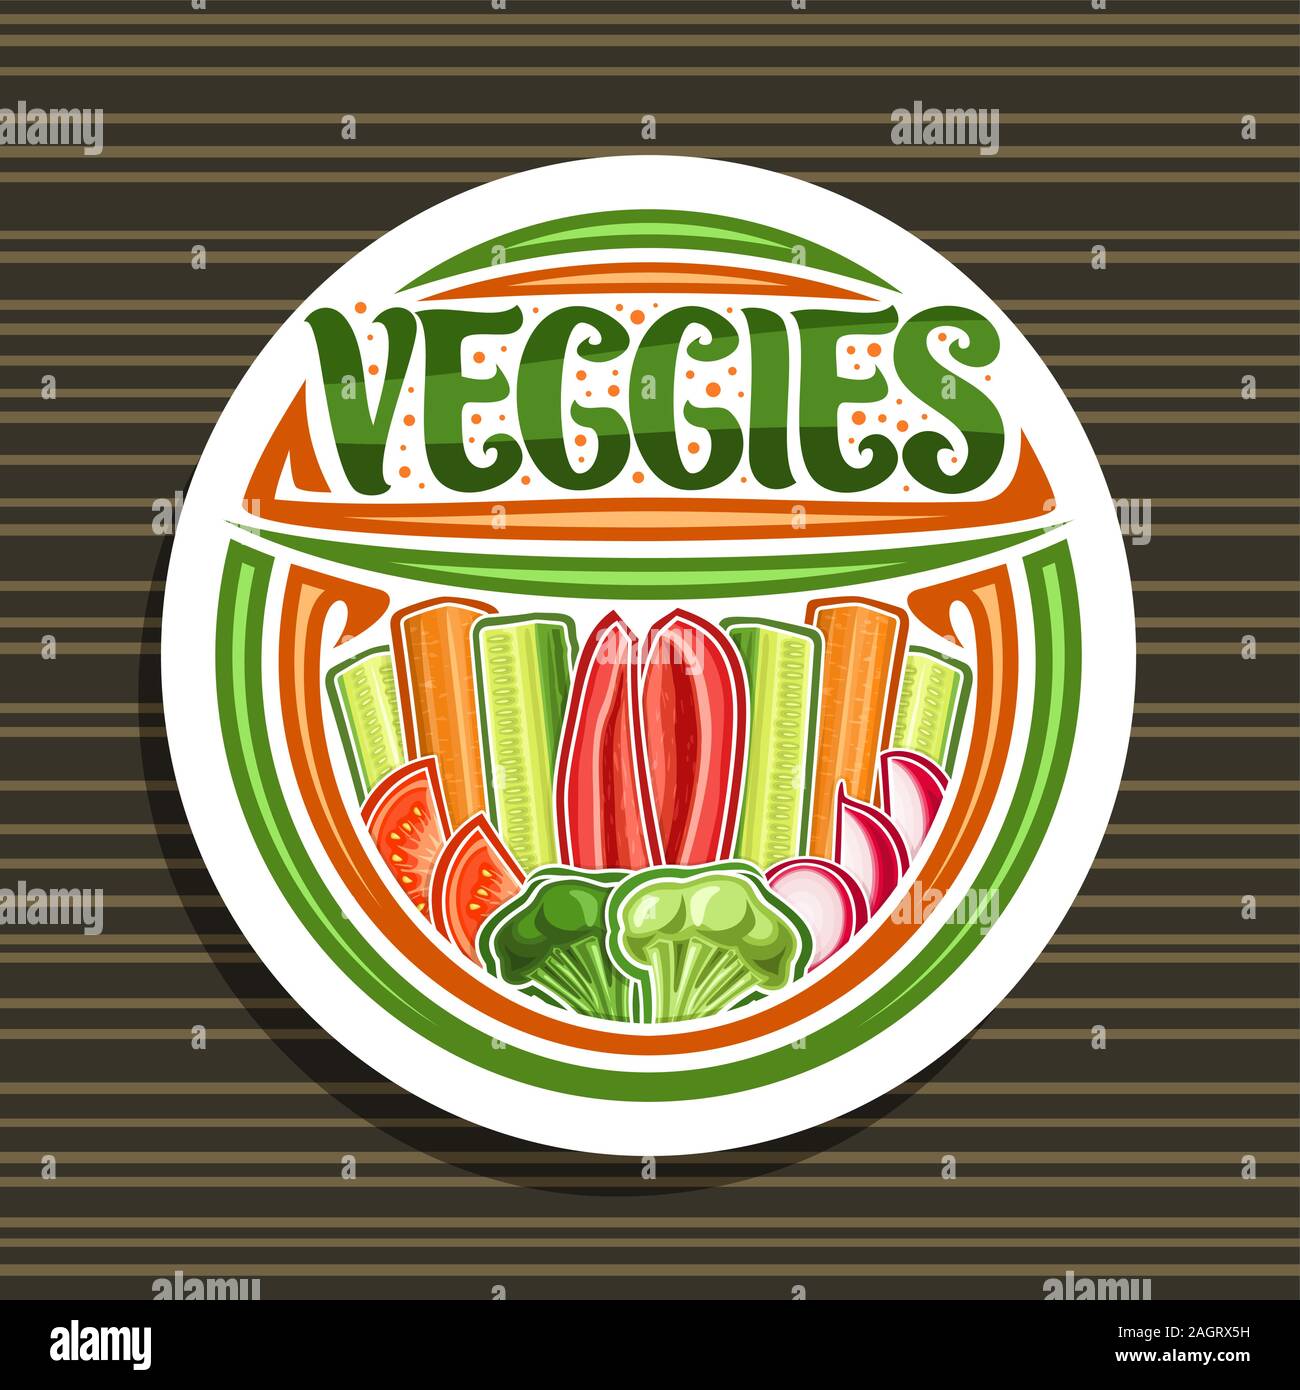 Vector logo for Veggies, white tag with illustration of raw vegetables group in a row, decorative typeface for word veggies, design signage for farmer Stock Vector